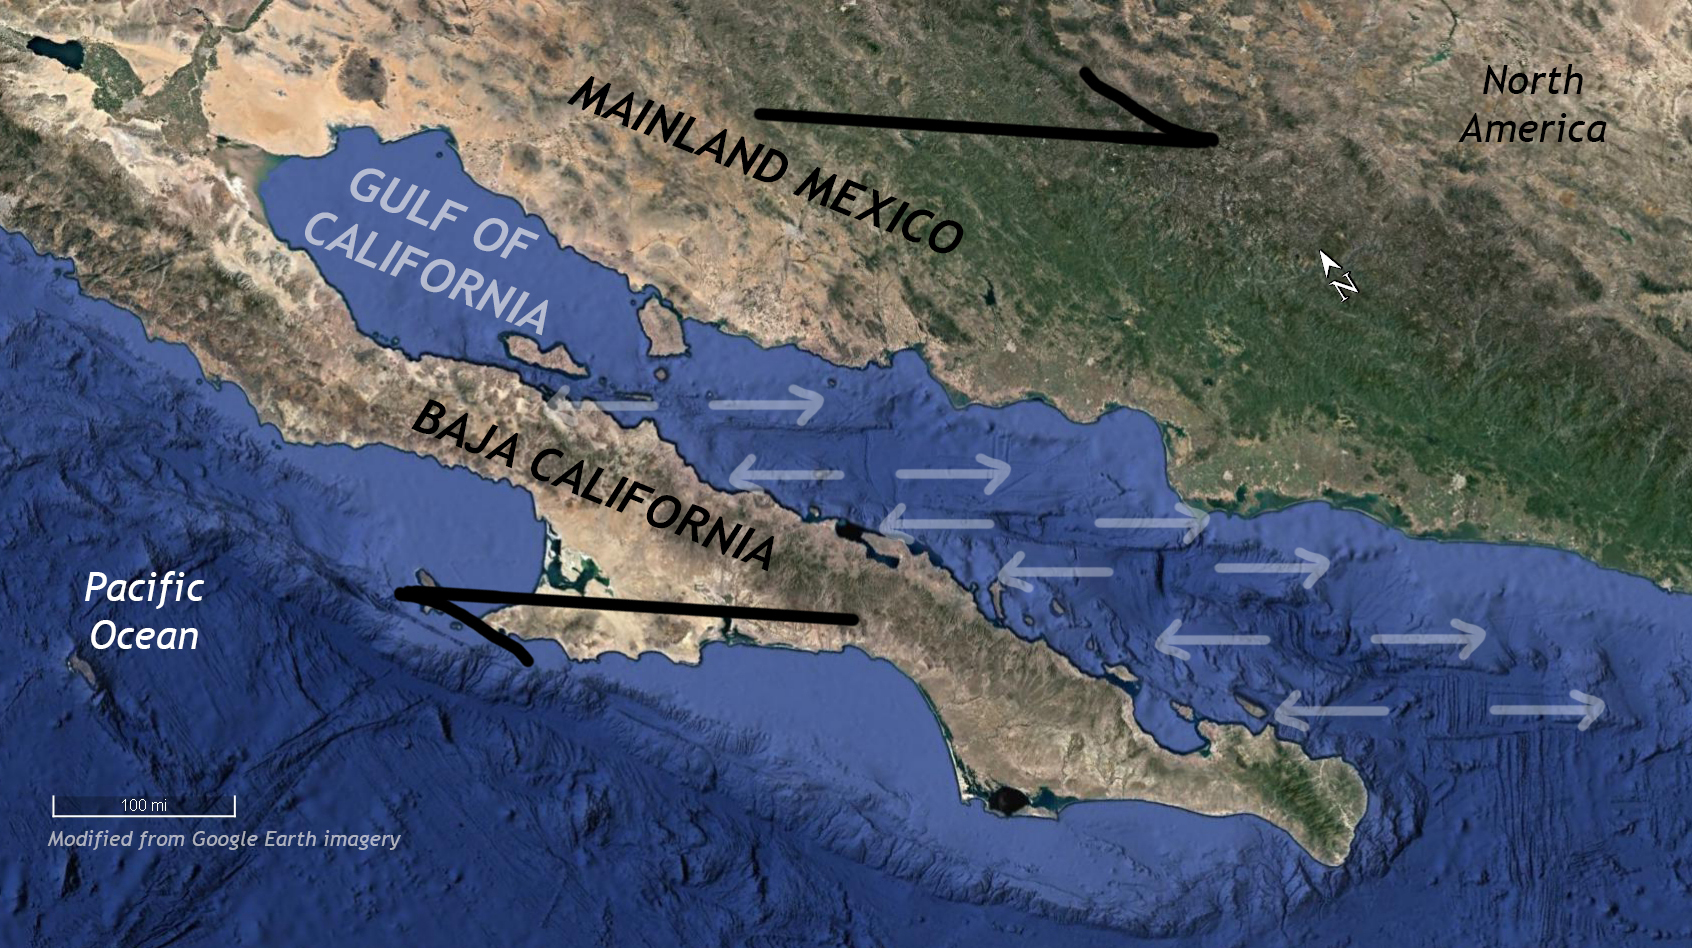 Annotated map of western Mexico and the eastern Pacific Ocean. Specifically, the map shows the Baja California peninsula, a long skinny ribbon of land, separated from mainland Mexico from the Gulf of California, a long, skinny body of water. At the bottom of the Gulf is a zigzag pattern of spreading center segments (oceanic ridge) and perpendicular transform faults.